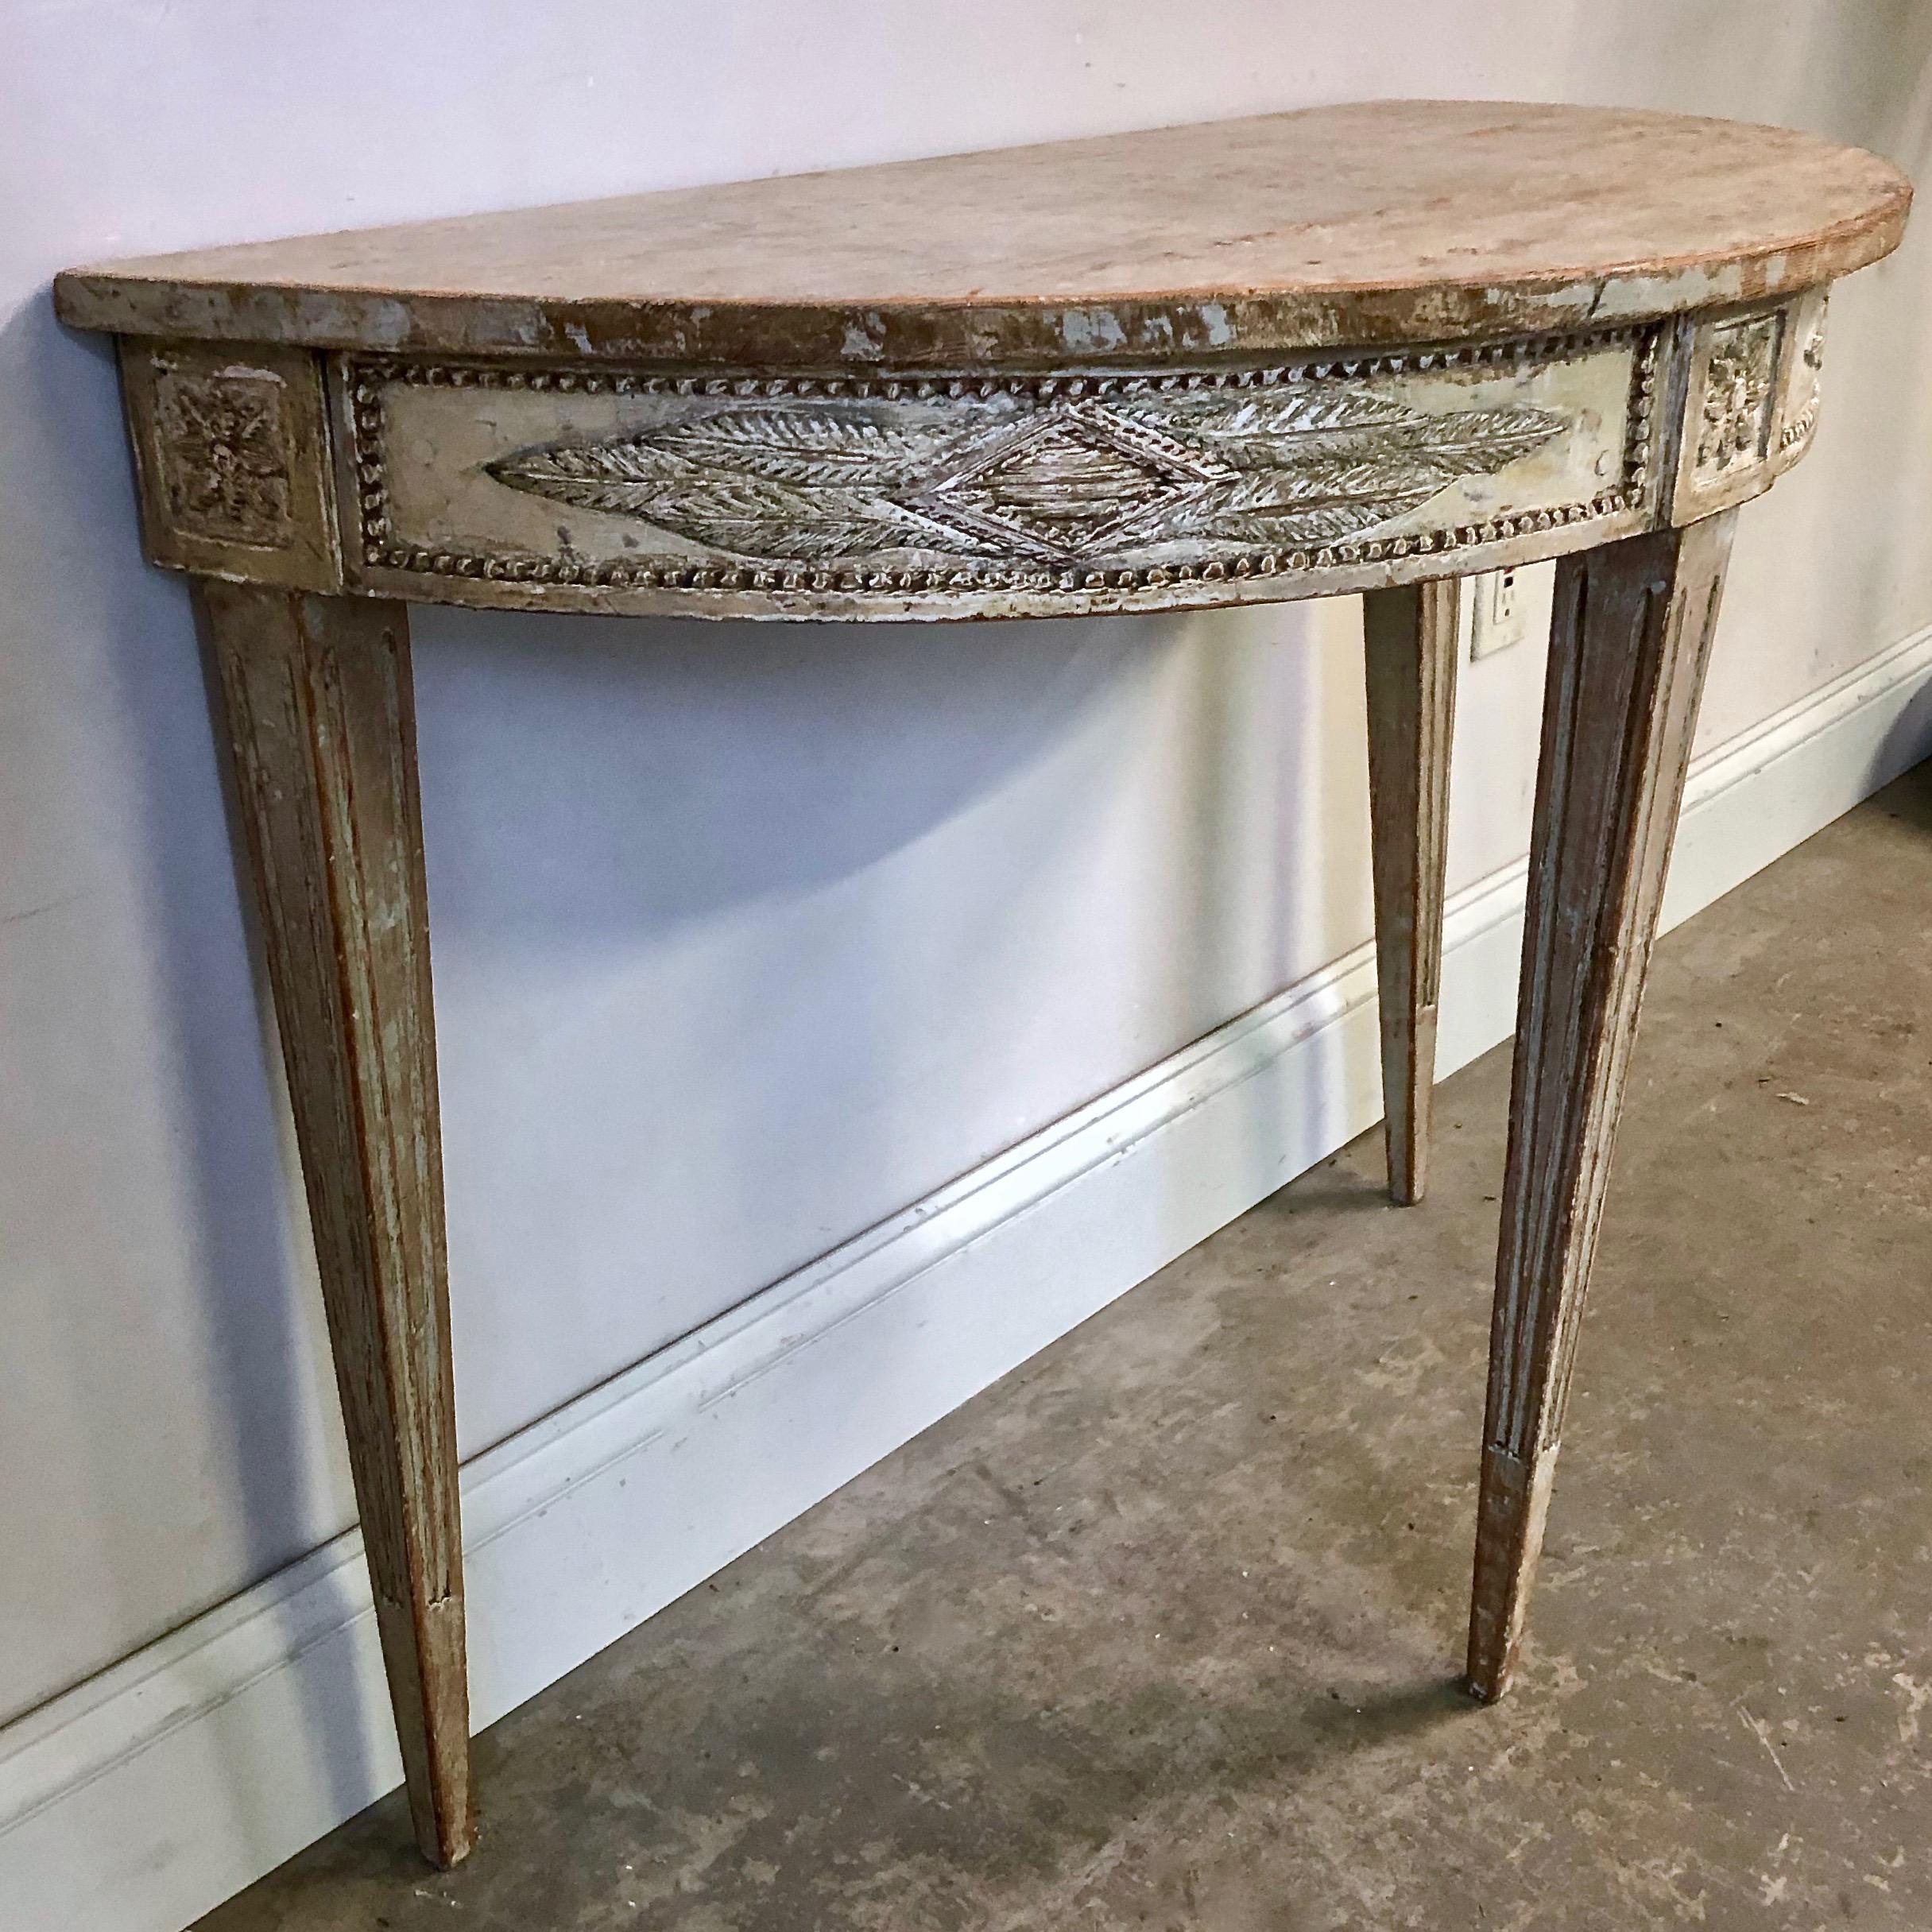 Very elegant 18th century Swedish period Gustavian freestanding console or table with richly decorated with diamond shape carvings on all around of the apron with florets at the corner blocks, wonderful tapered and fluted legs. This skillfully